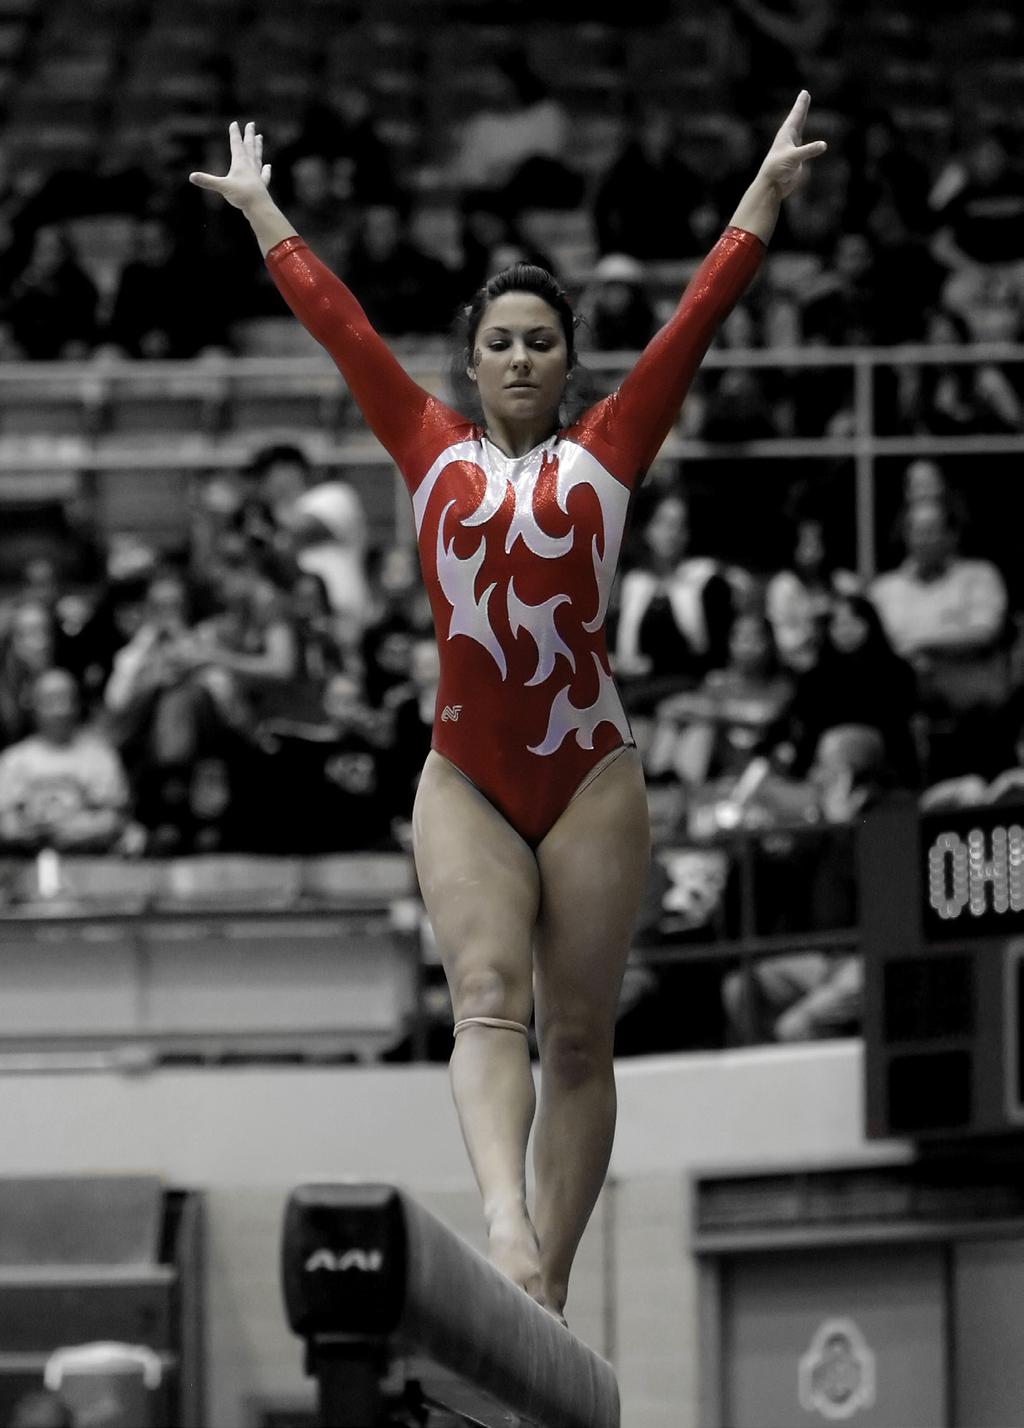 2012 SEASON BY THE NUMBERS SEASON HIGH INDIVIDUAL SCORES First Name Last Name V UB BB FX AA Victoria Aepli - 9.800 9.650 - - Colleen Dean 9.900 9.875 9.925 9.925 39.600 Alex DeLuca - 9.800-9.